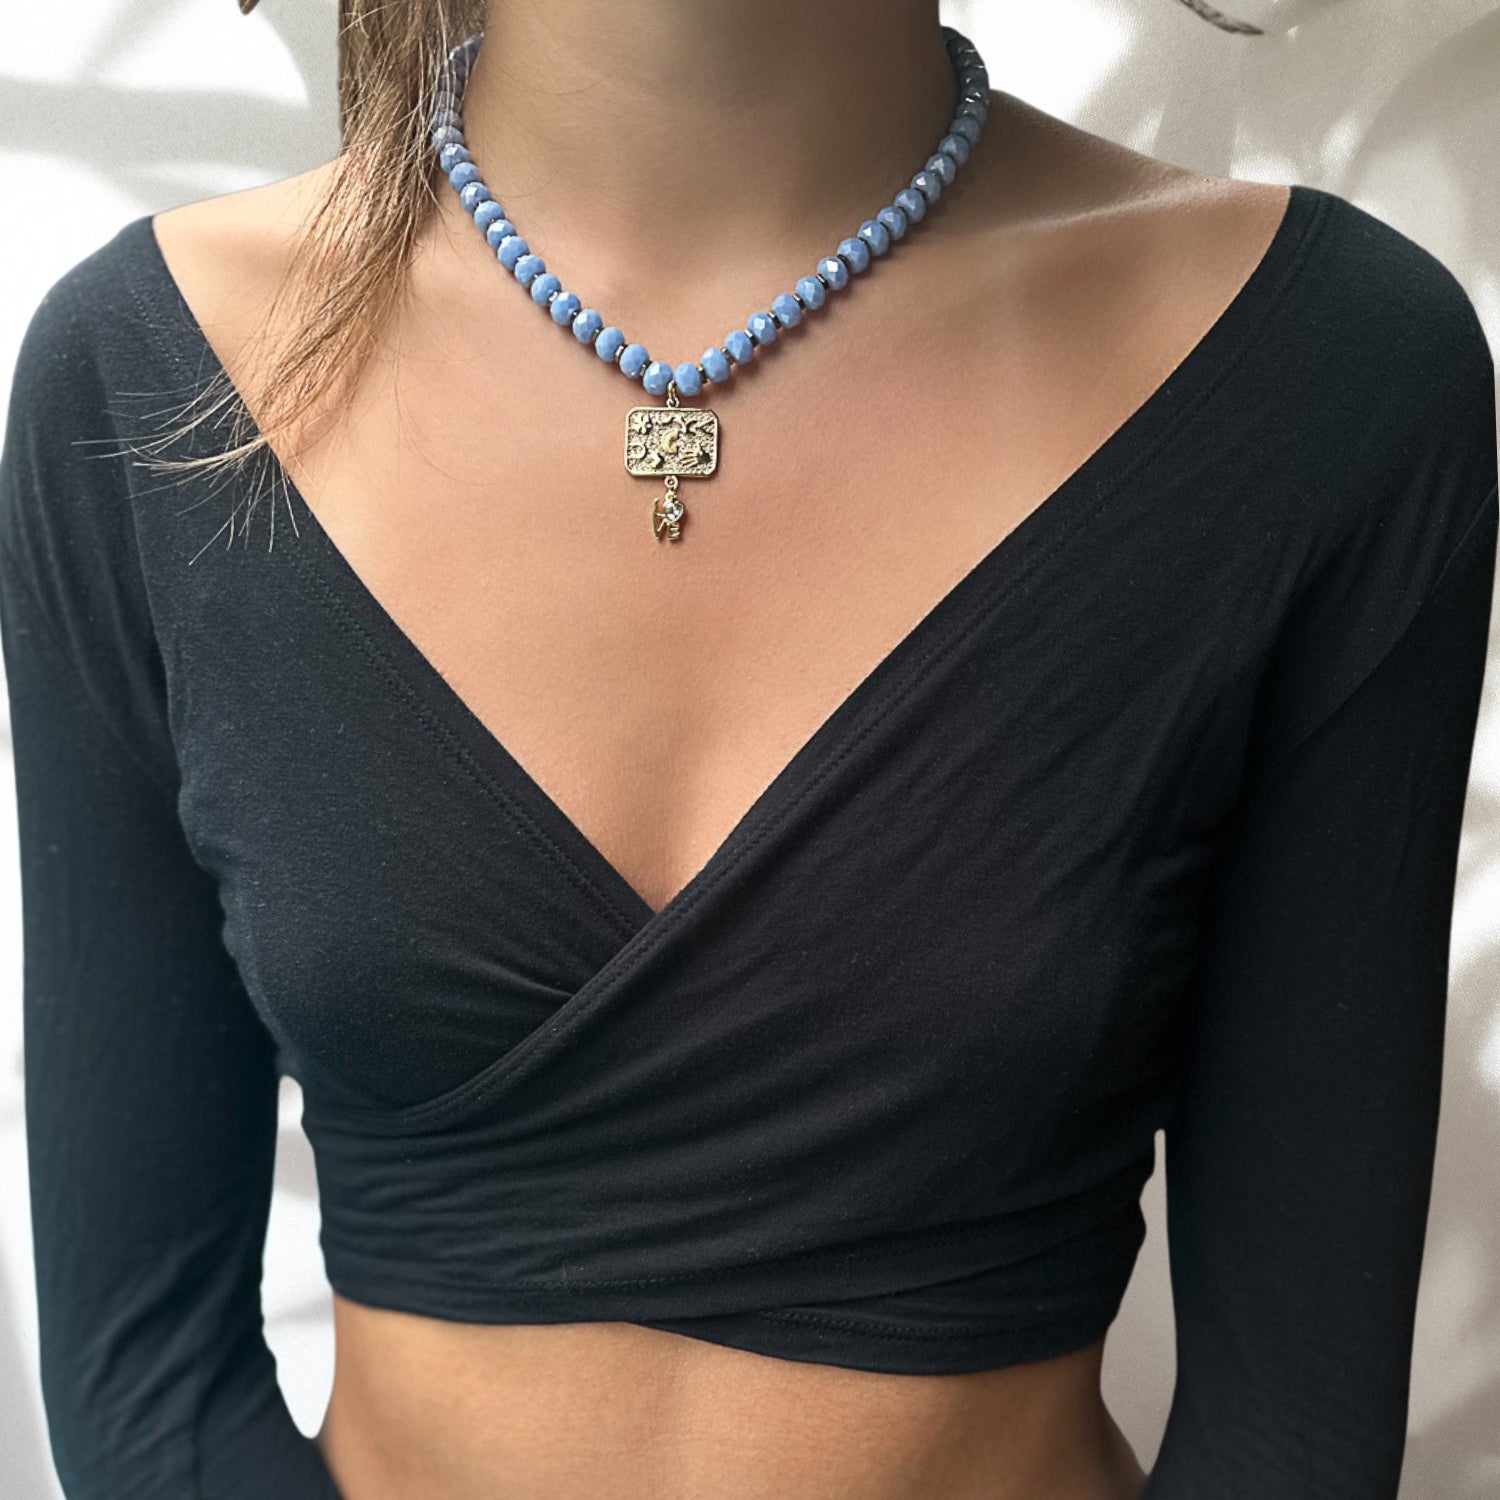 The model wearing the Best Wishes Magical Talisman Necklace with a stunning blue outfit.